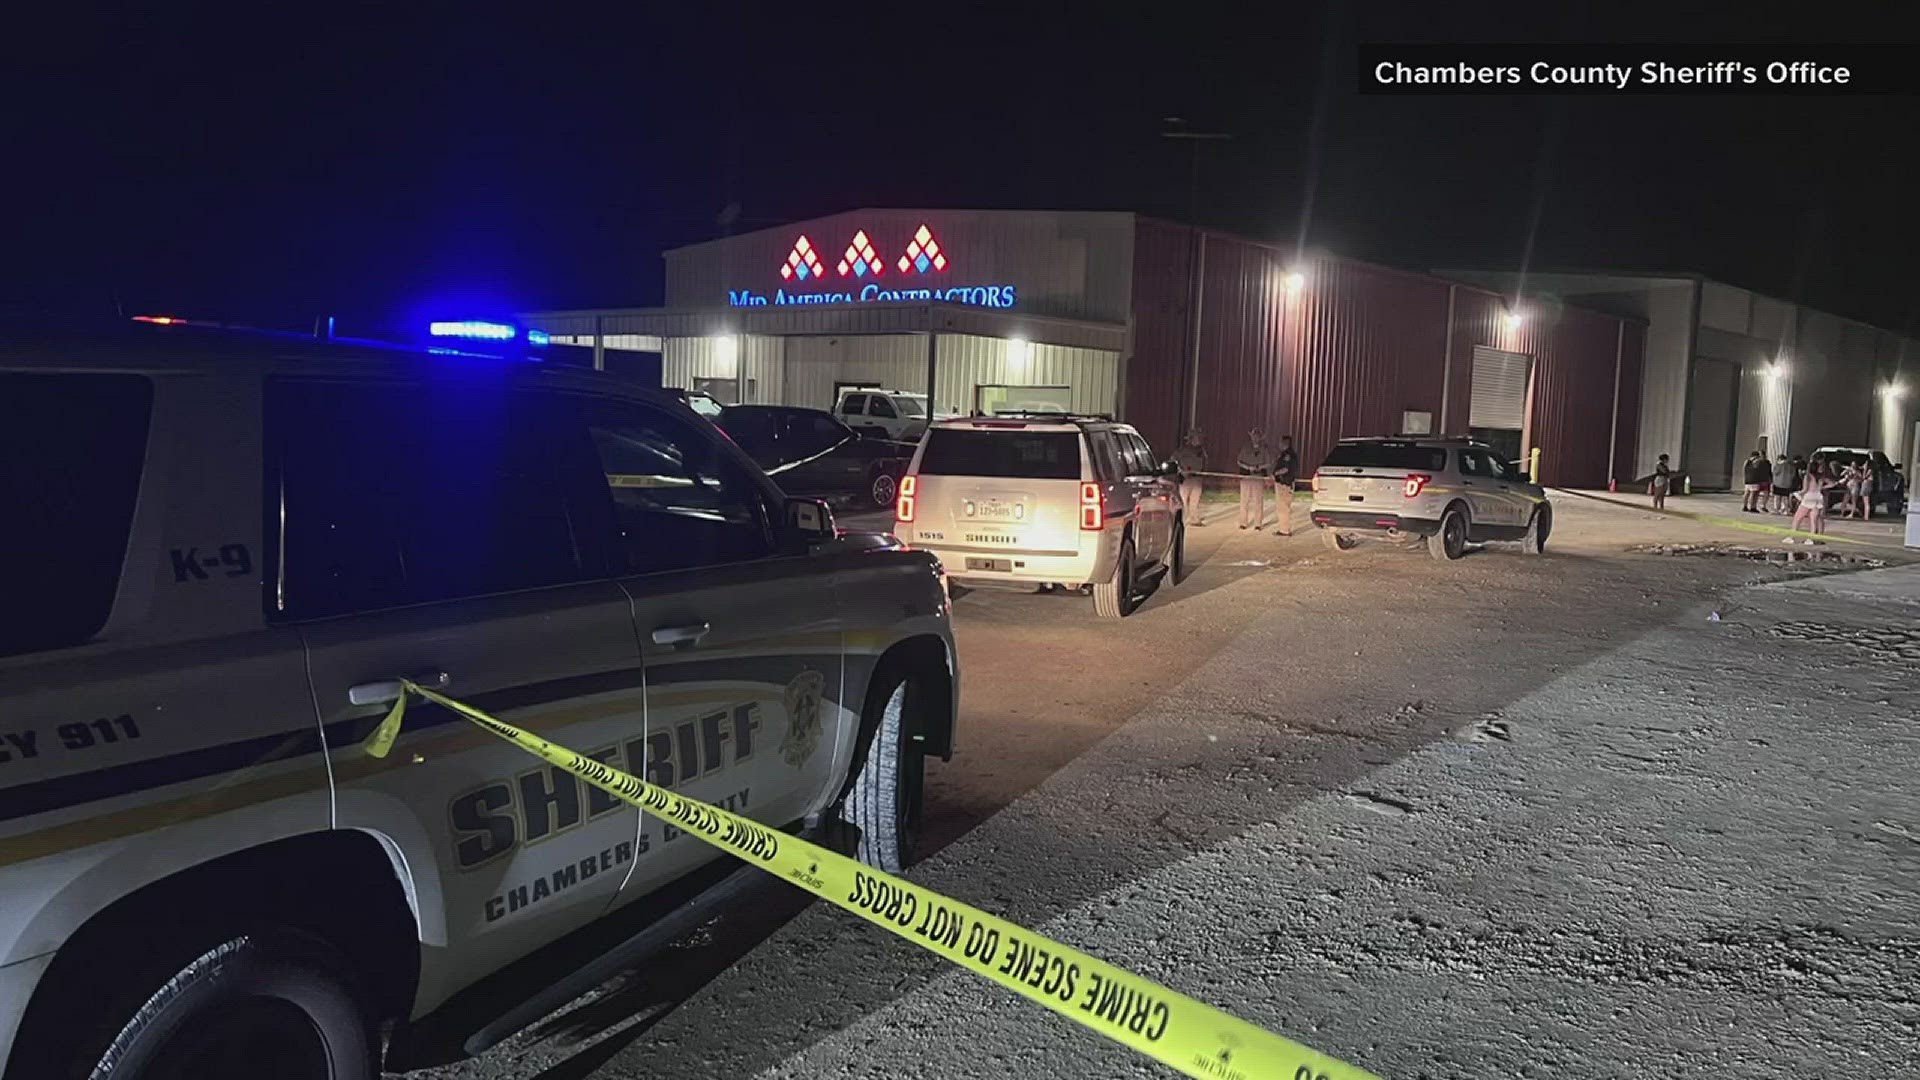 An estimate of 150 to 300 underage students and graduates from the Beaumont and Nederland area attended the party in Winnie. One 18-year-old was shot and injured.